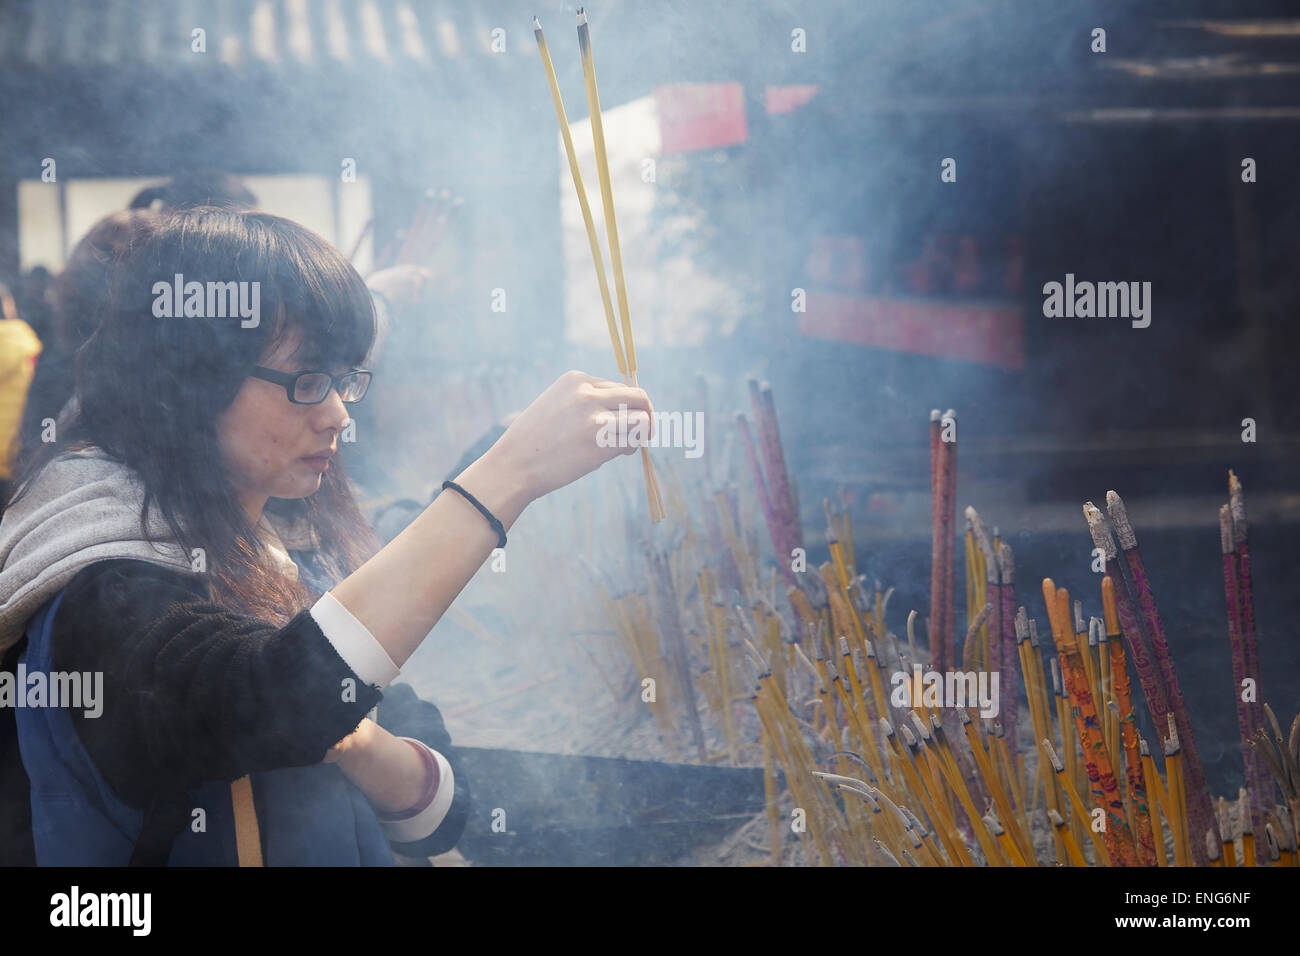 Burning incense sticks at Jiming Temple, a Buddhist temple in the city of Nanjing, in Jiangsu province, China. Stock Photo